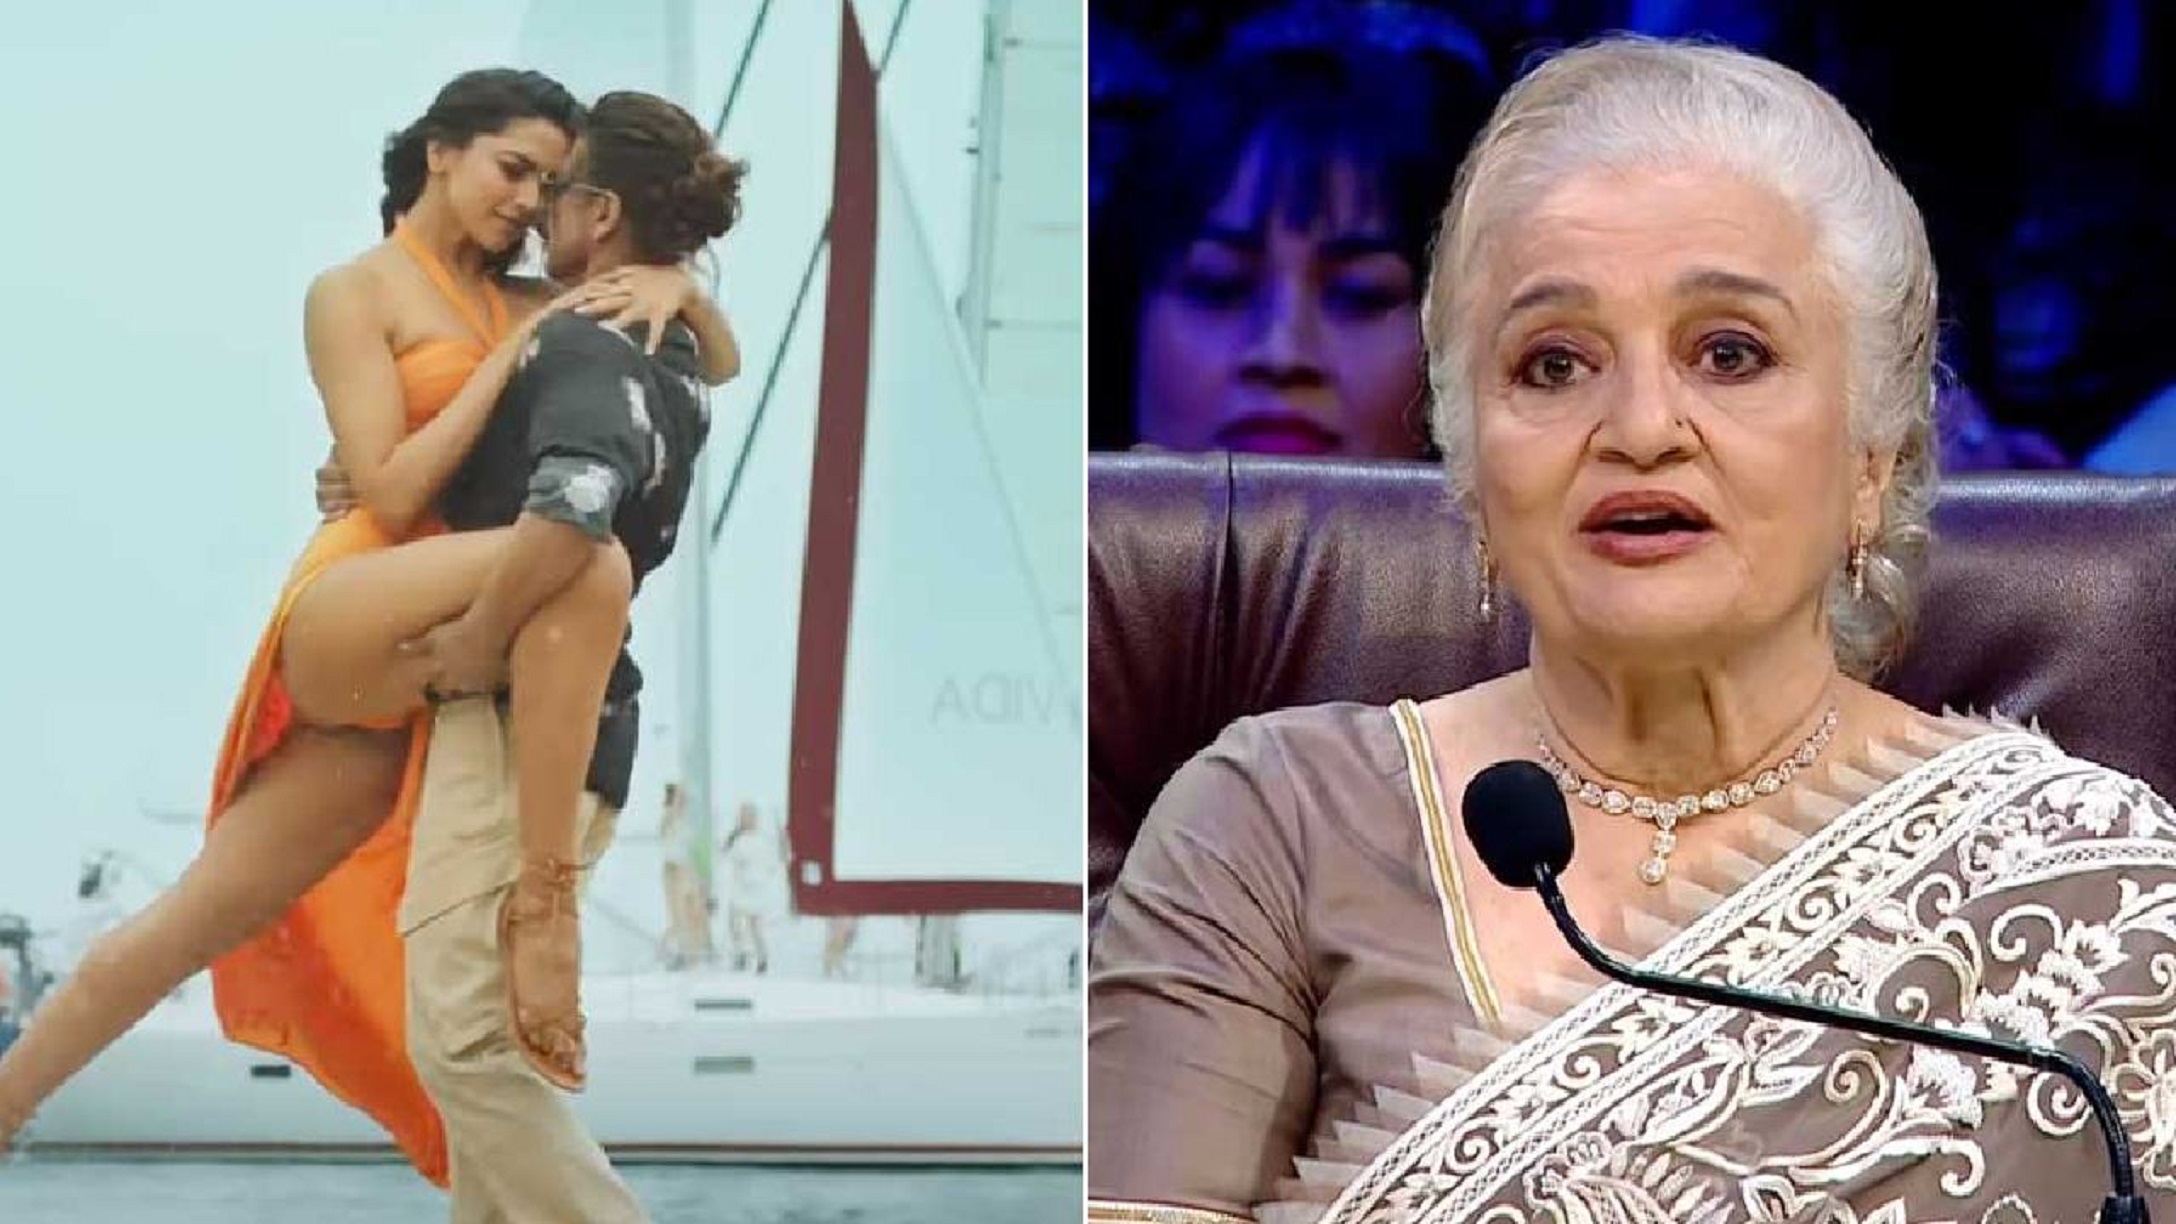 Veteran actress Asha Parekh reacts to ‘Pathaan’ controversy, says ‘we are becoming too close-minded’